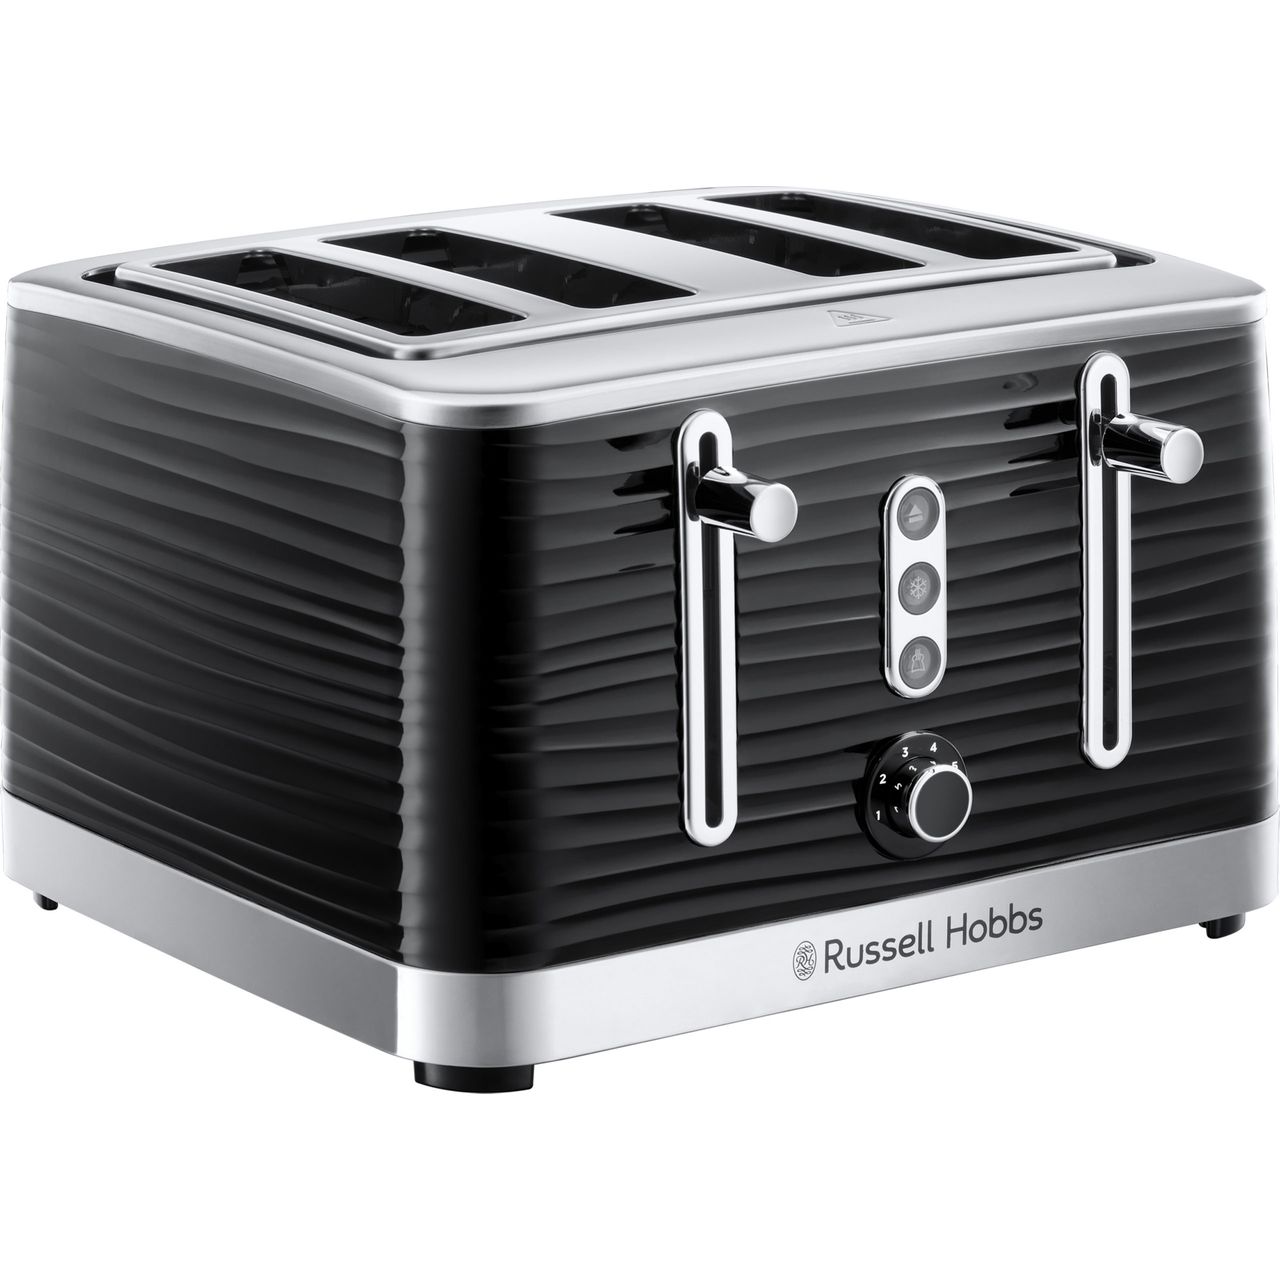 Faster toasting toaster with LED LIGHT strip,Russell Hobbs